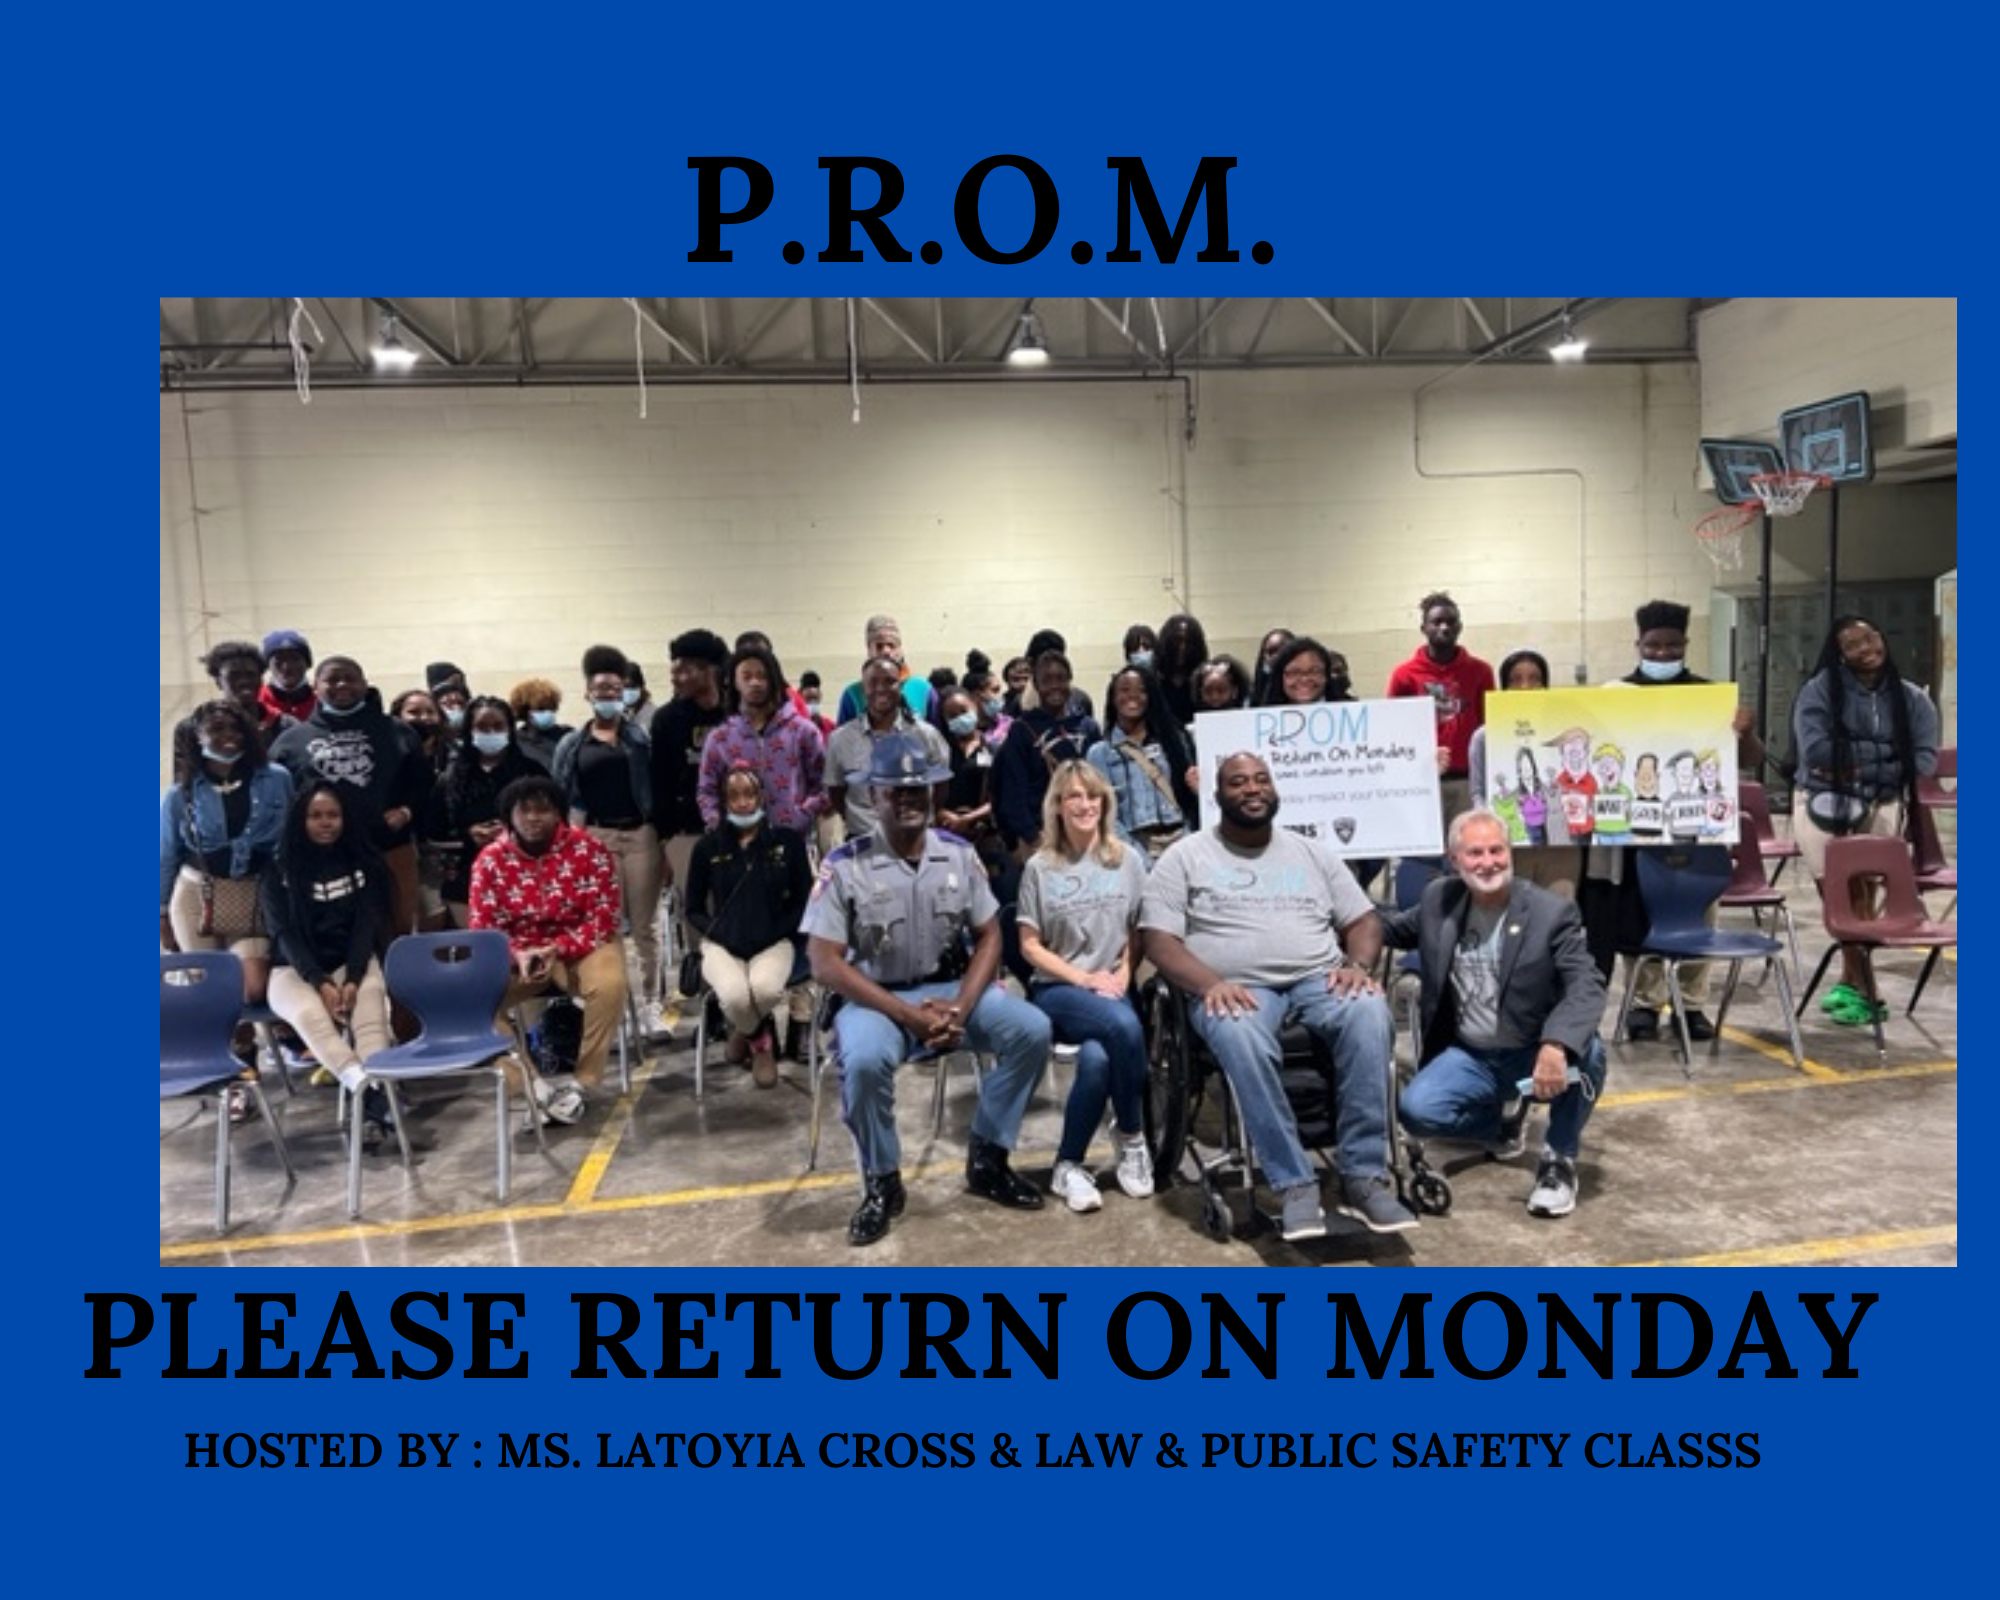 P.R.O.M. stands for Please Return on Monday hosted by LaToyia Cross & Law and Public Safety Class